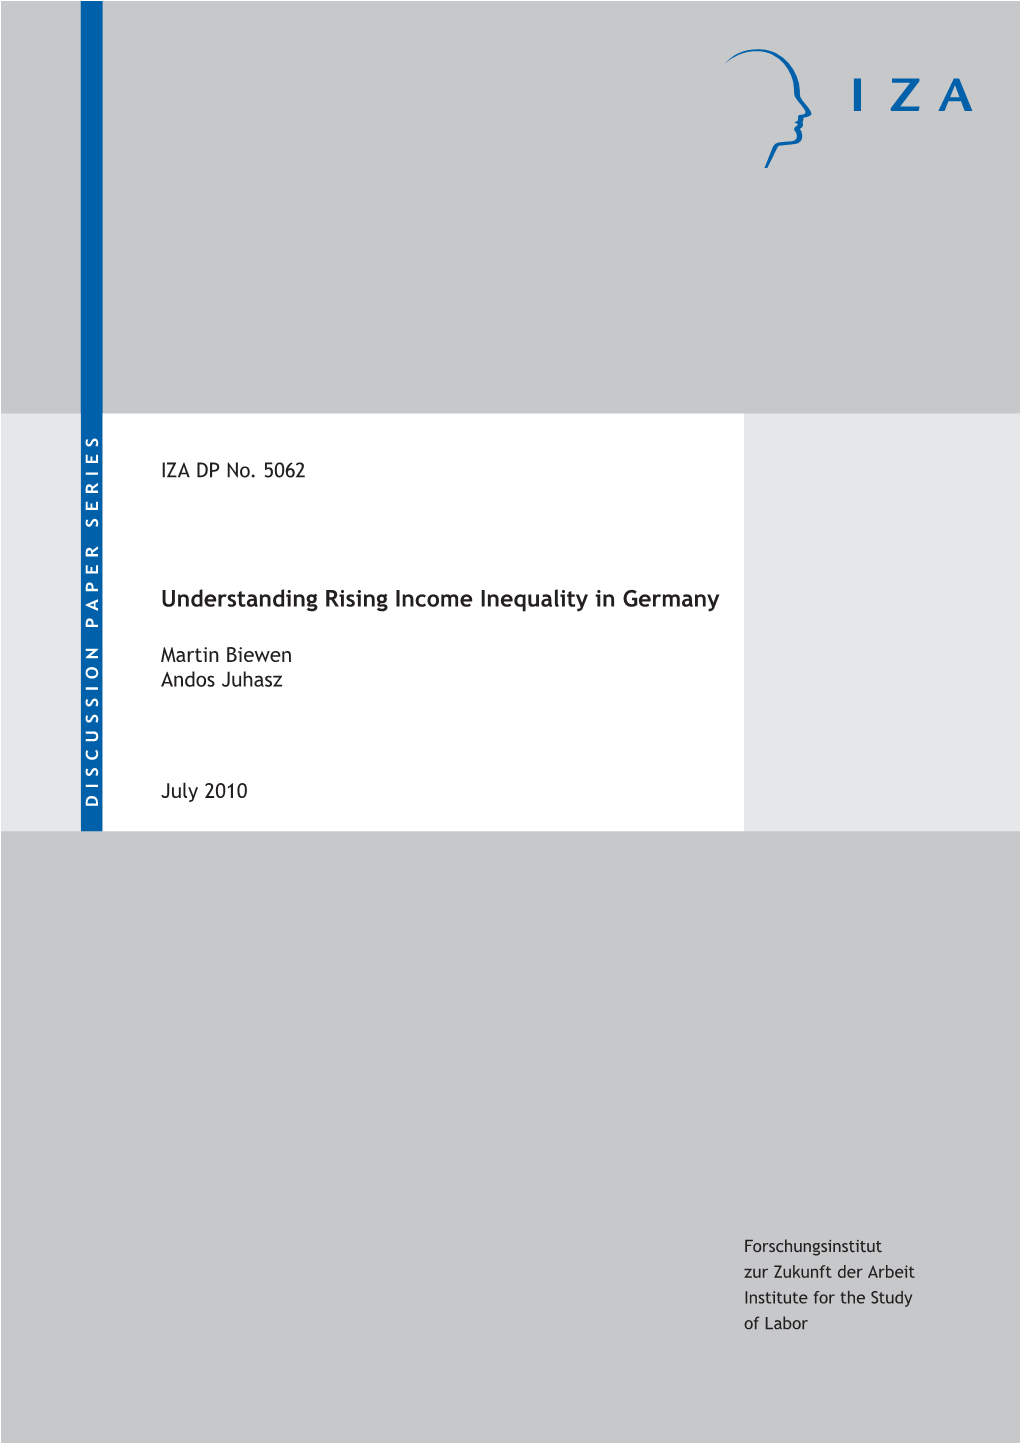 Understanding Rising Income Inequality in Germany